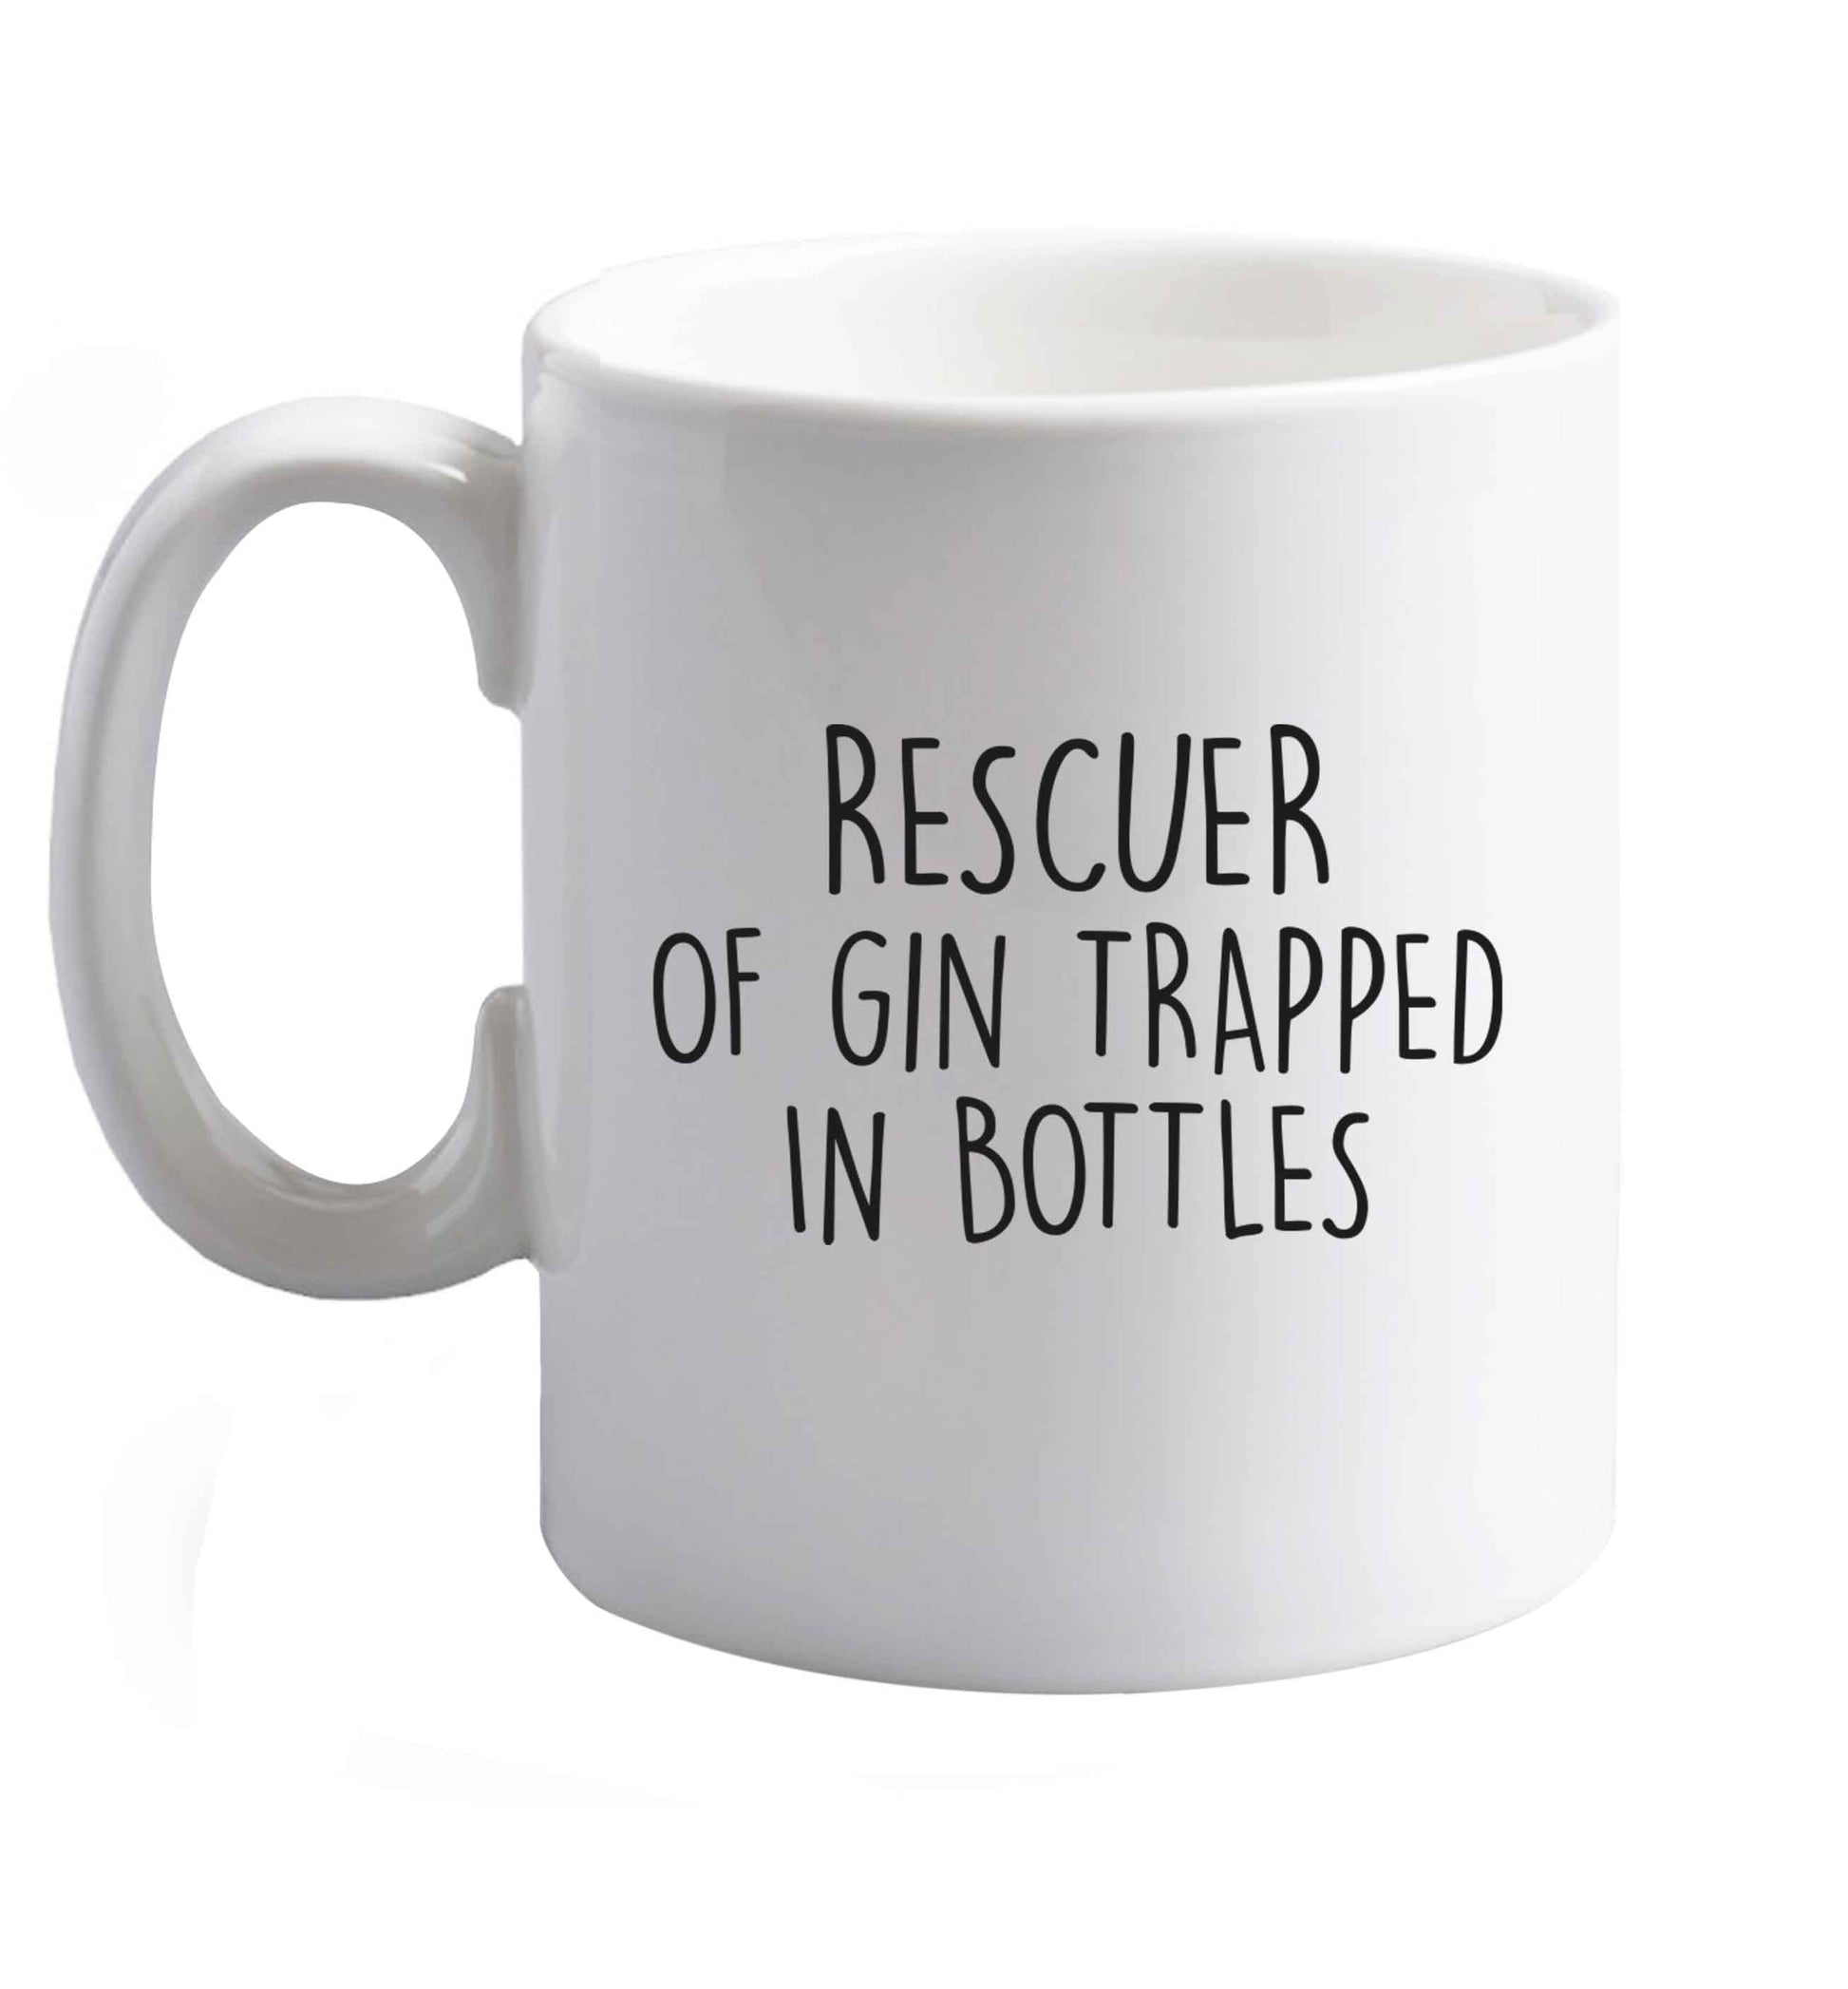 10 oz Rescuer of Gin Trapped in Bottles ceramic mug right handed